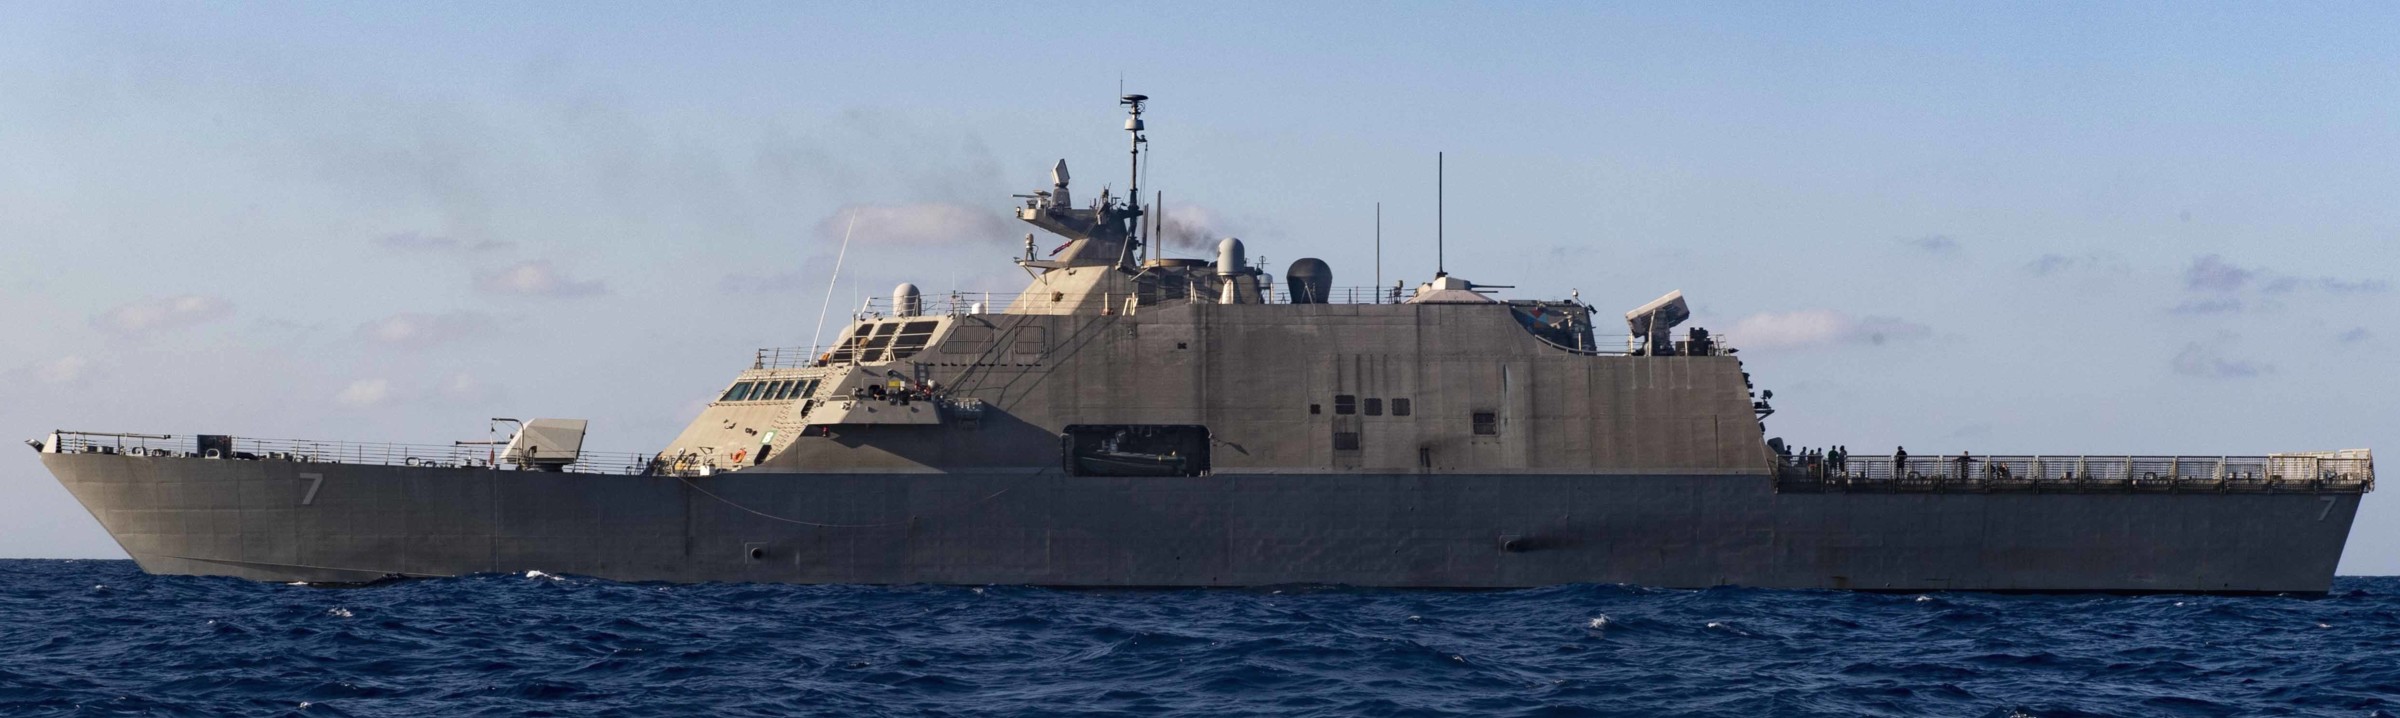 lcs-7 uss detroit freedom class littoral combat ship us navy 42